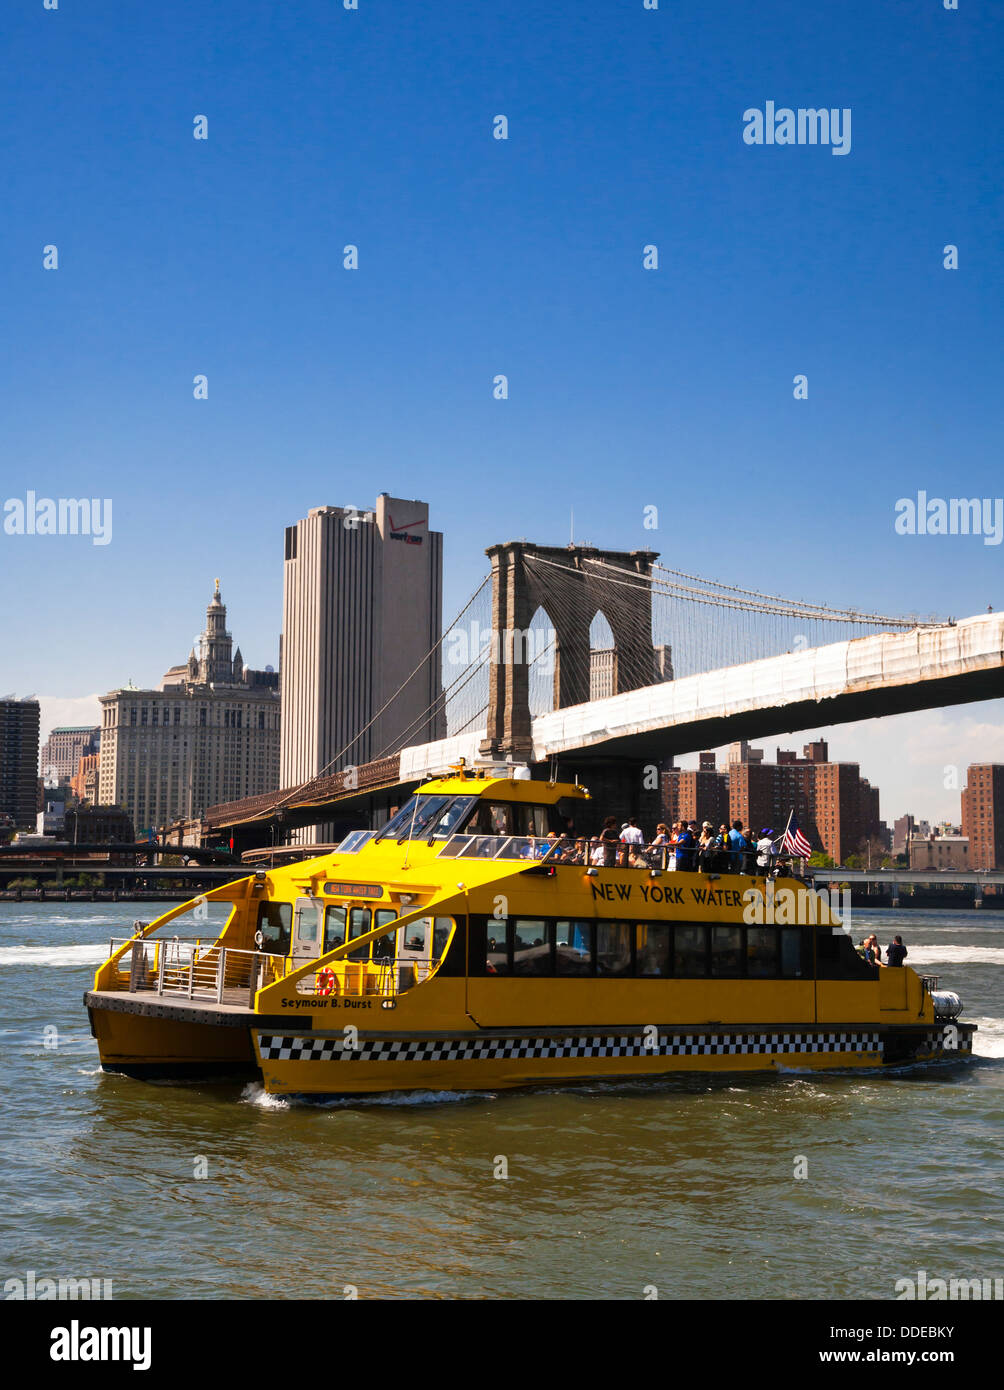 Yellow New York water taxi on the East River, NYC, USA. Stock Photo